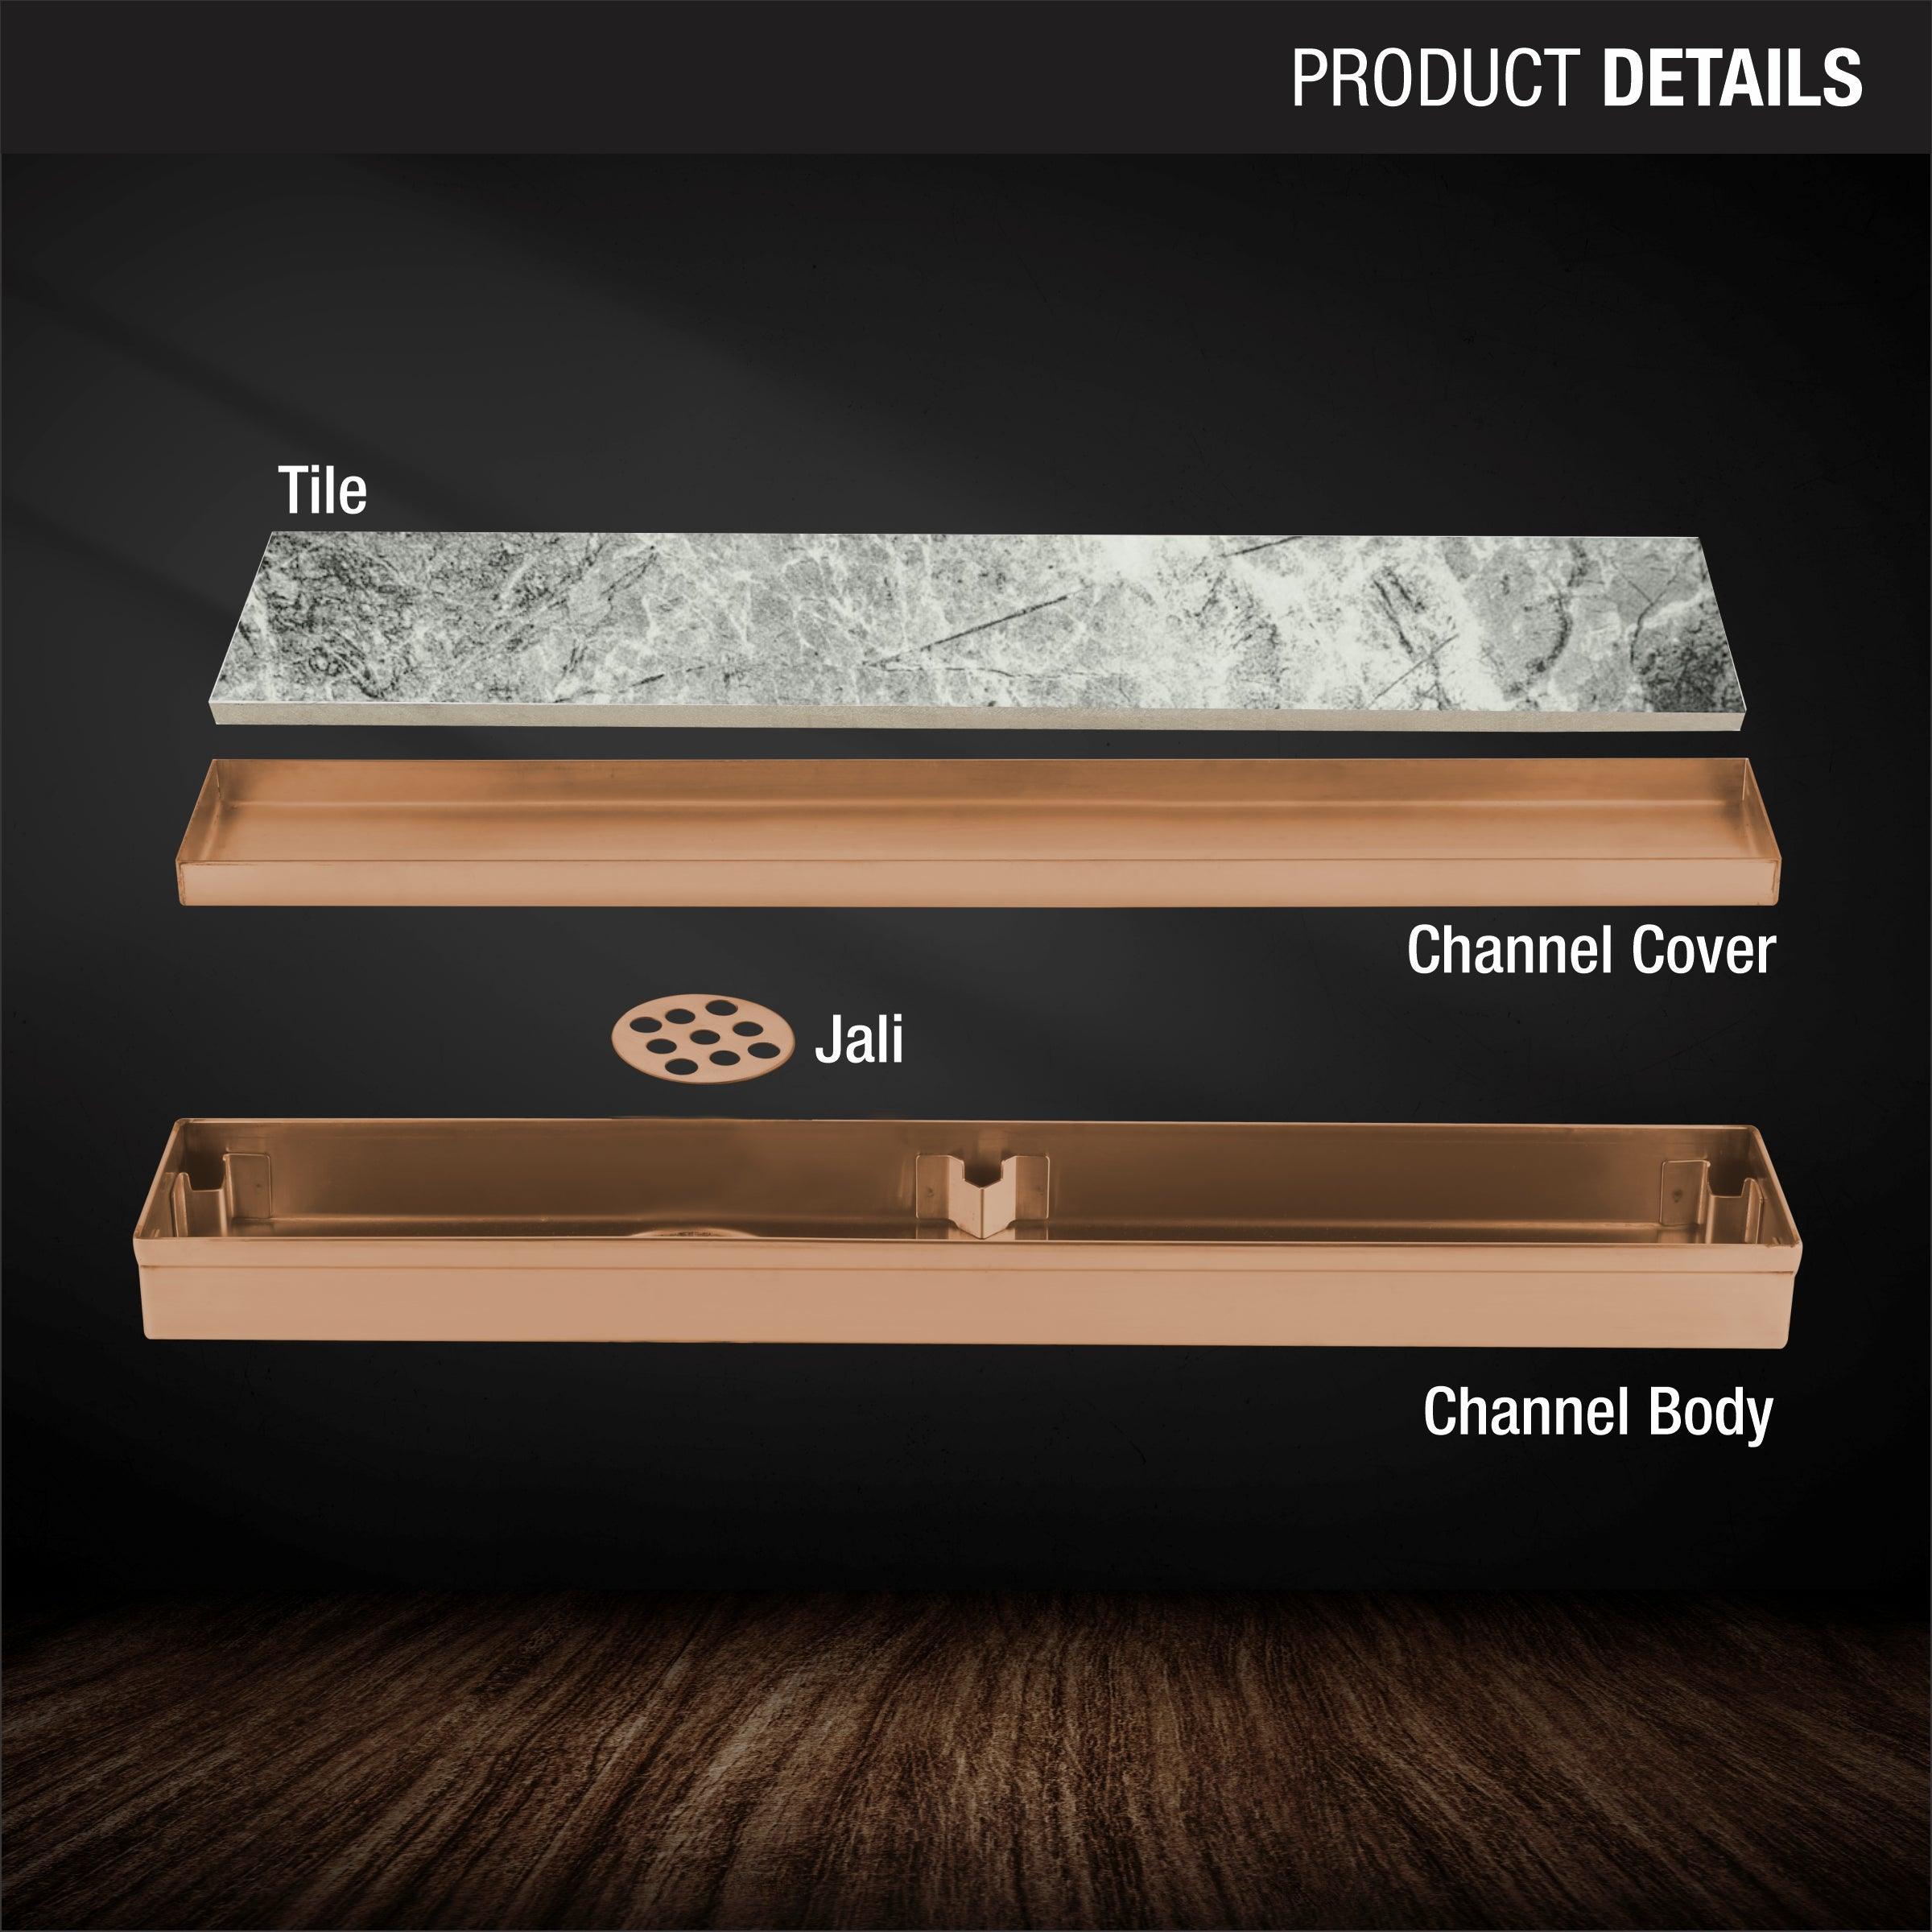 Tile Insert Shower Drain Channel - Yellow Gold (40 x 2 Inches) product details